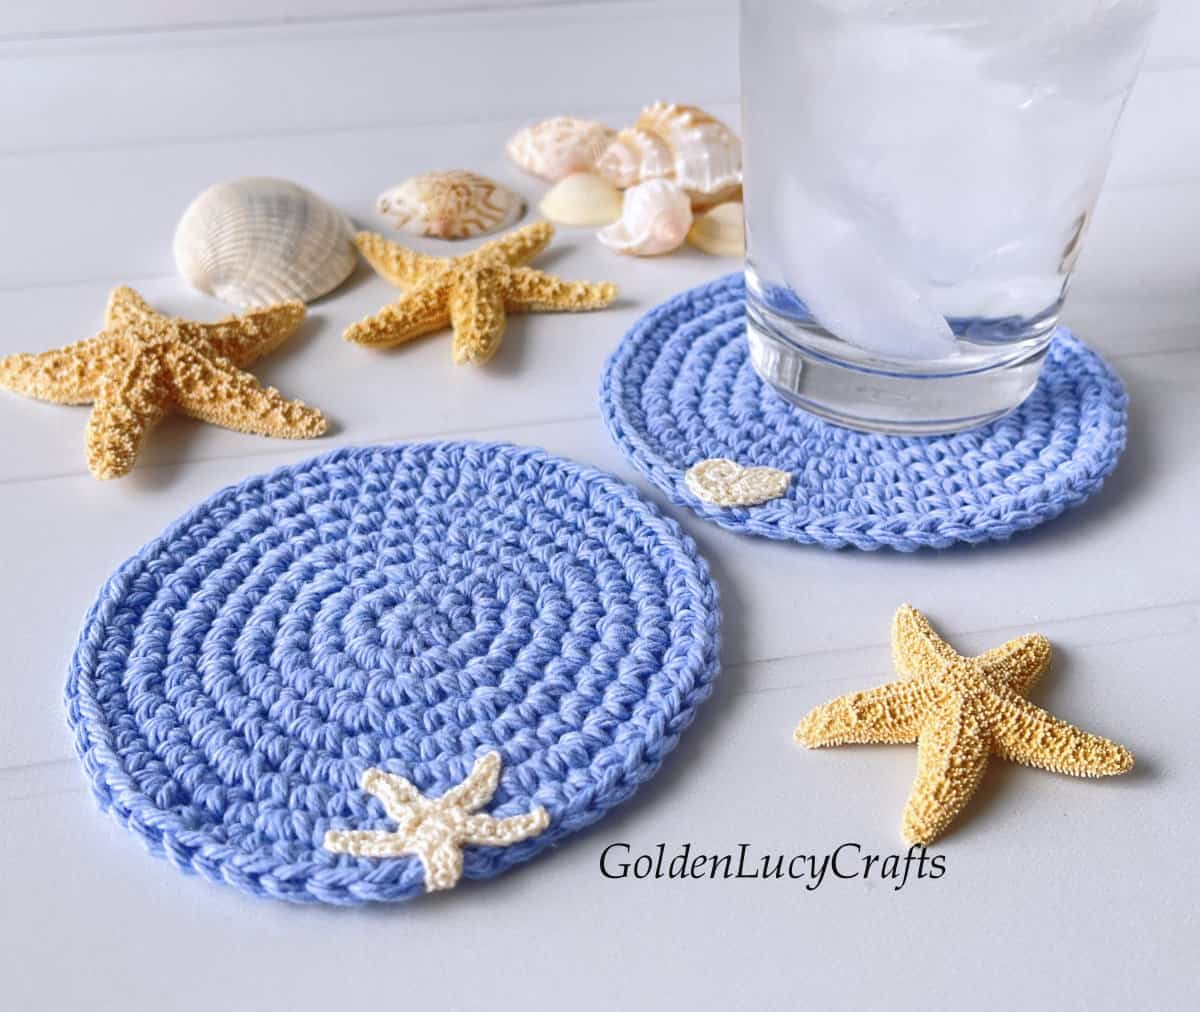 Crocheted ocean themed blue coasters, glass of water, sea stars and sea shells.